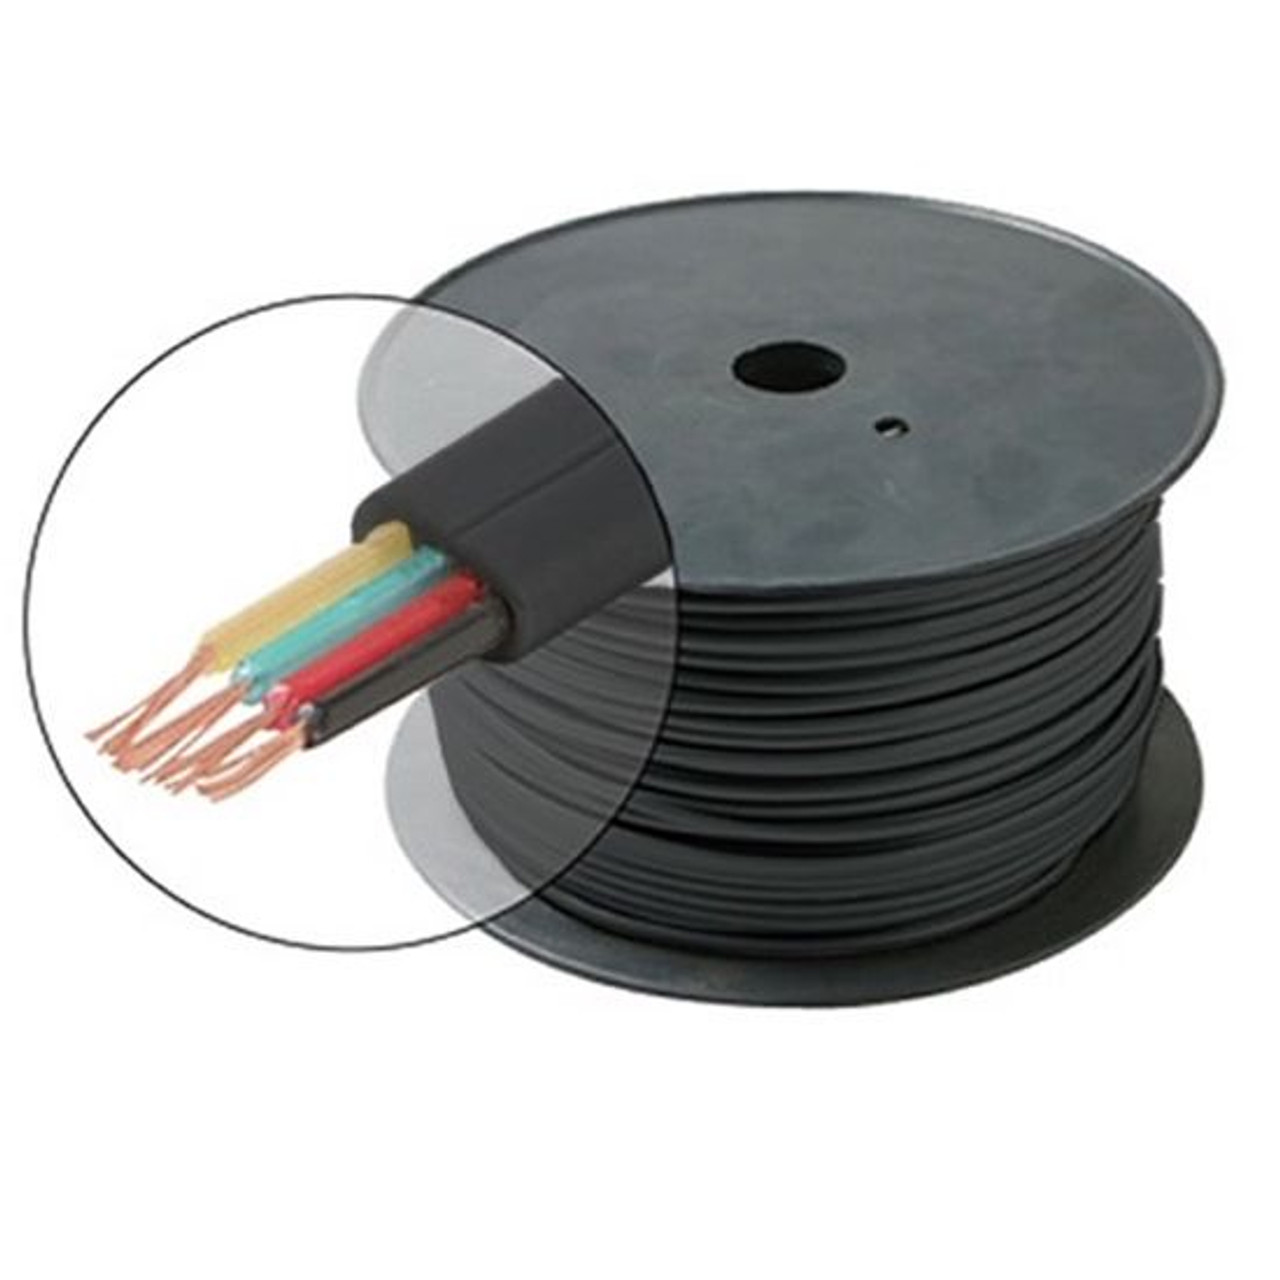 Eagle 500 FT Telephone Cable Black 4 Conductor Flat Modular 28 AWG Stranded Copper Telephone Line Audio Data Signal Jack RJ-11 Hook-Up Extension Cord, Bulk Roll with No Connectors, Part # 300840-BK